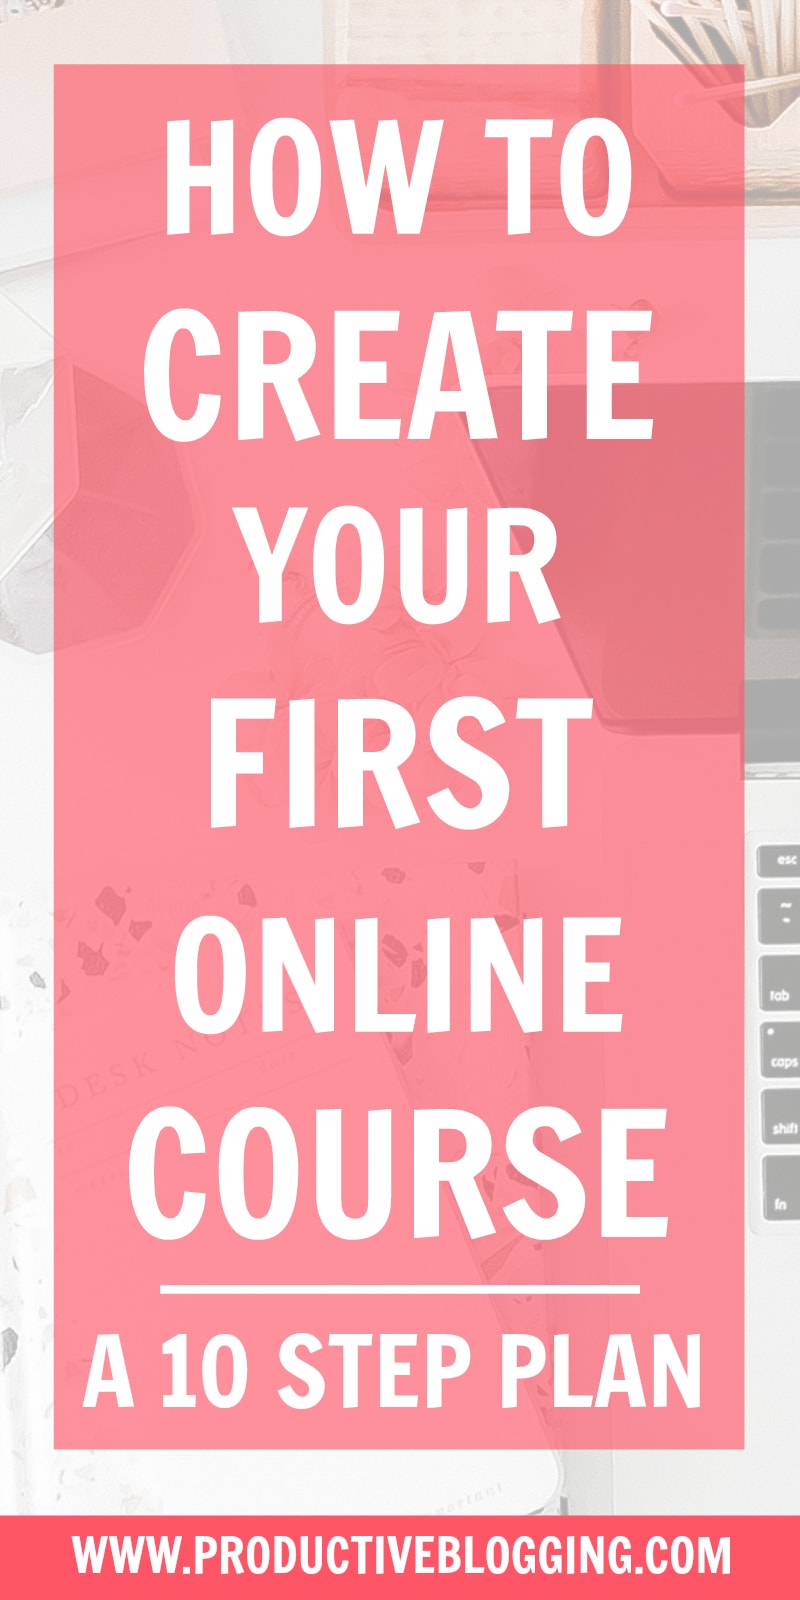 Online courses are HUGE right now. But how do you get started? Here’s my 10 step plan to help you create your first online course…#onlinecourse #digitalcourse #coursecreation #onlinecoursecreation #digitalcoursecreation #digitalproduct #teachable #coursecreator #digitallearning #digitaleducator #bloggingformoney #makemoneyblogging #howdoblogsmakemoney #passiveincome #treatitlikeabusiness #businessblogging #bizblogging #bloggingtips #productiveblogging